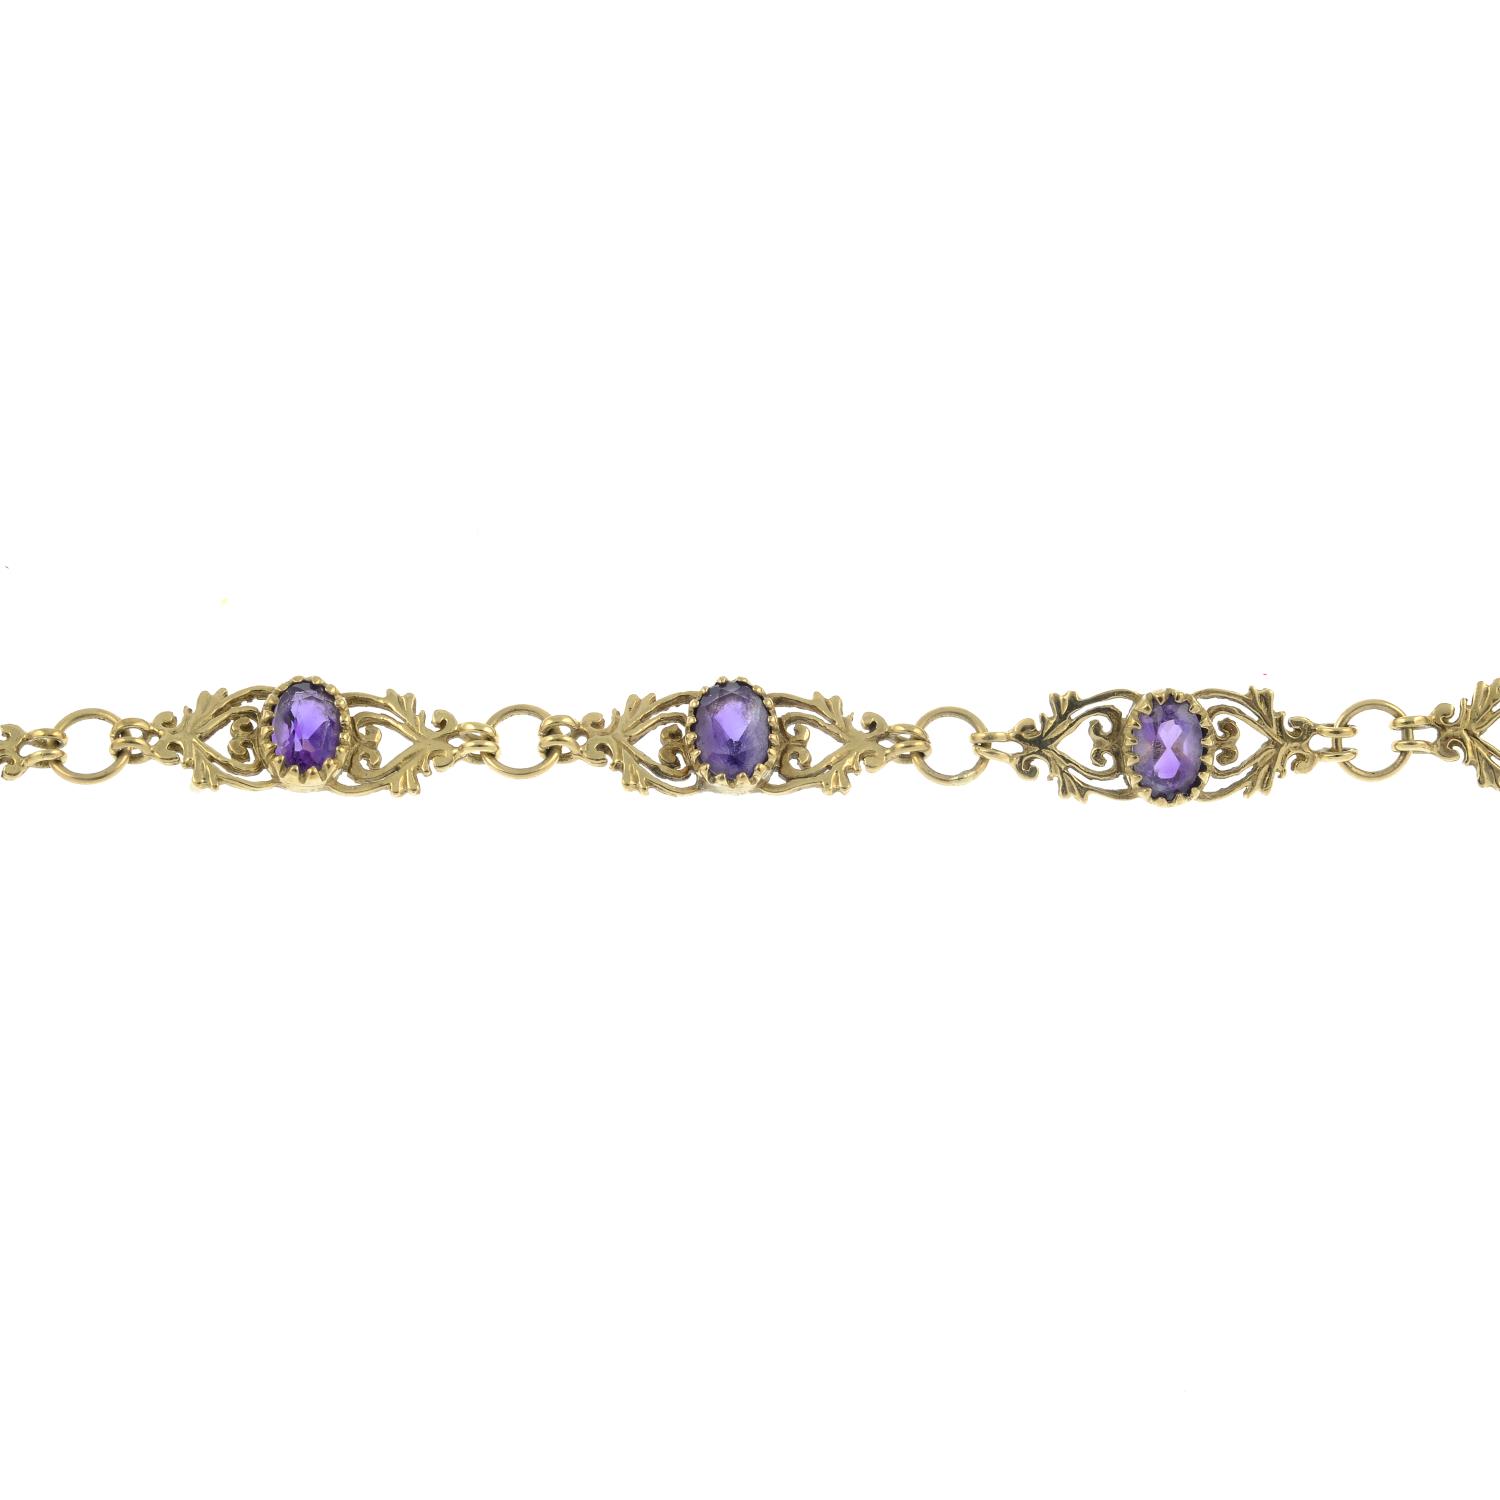 A amethyst bracelet with a pair of 9ct gold amethyst earrings.One with Hallmarks for Birmingham.